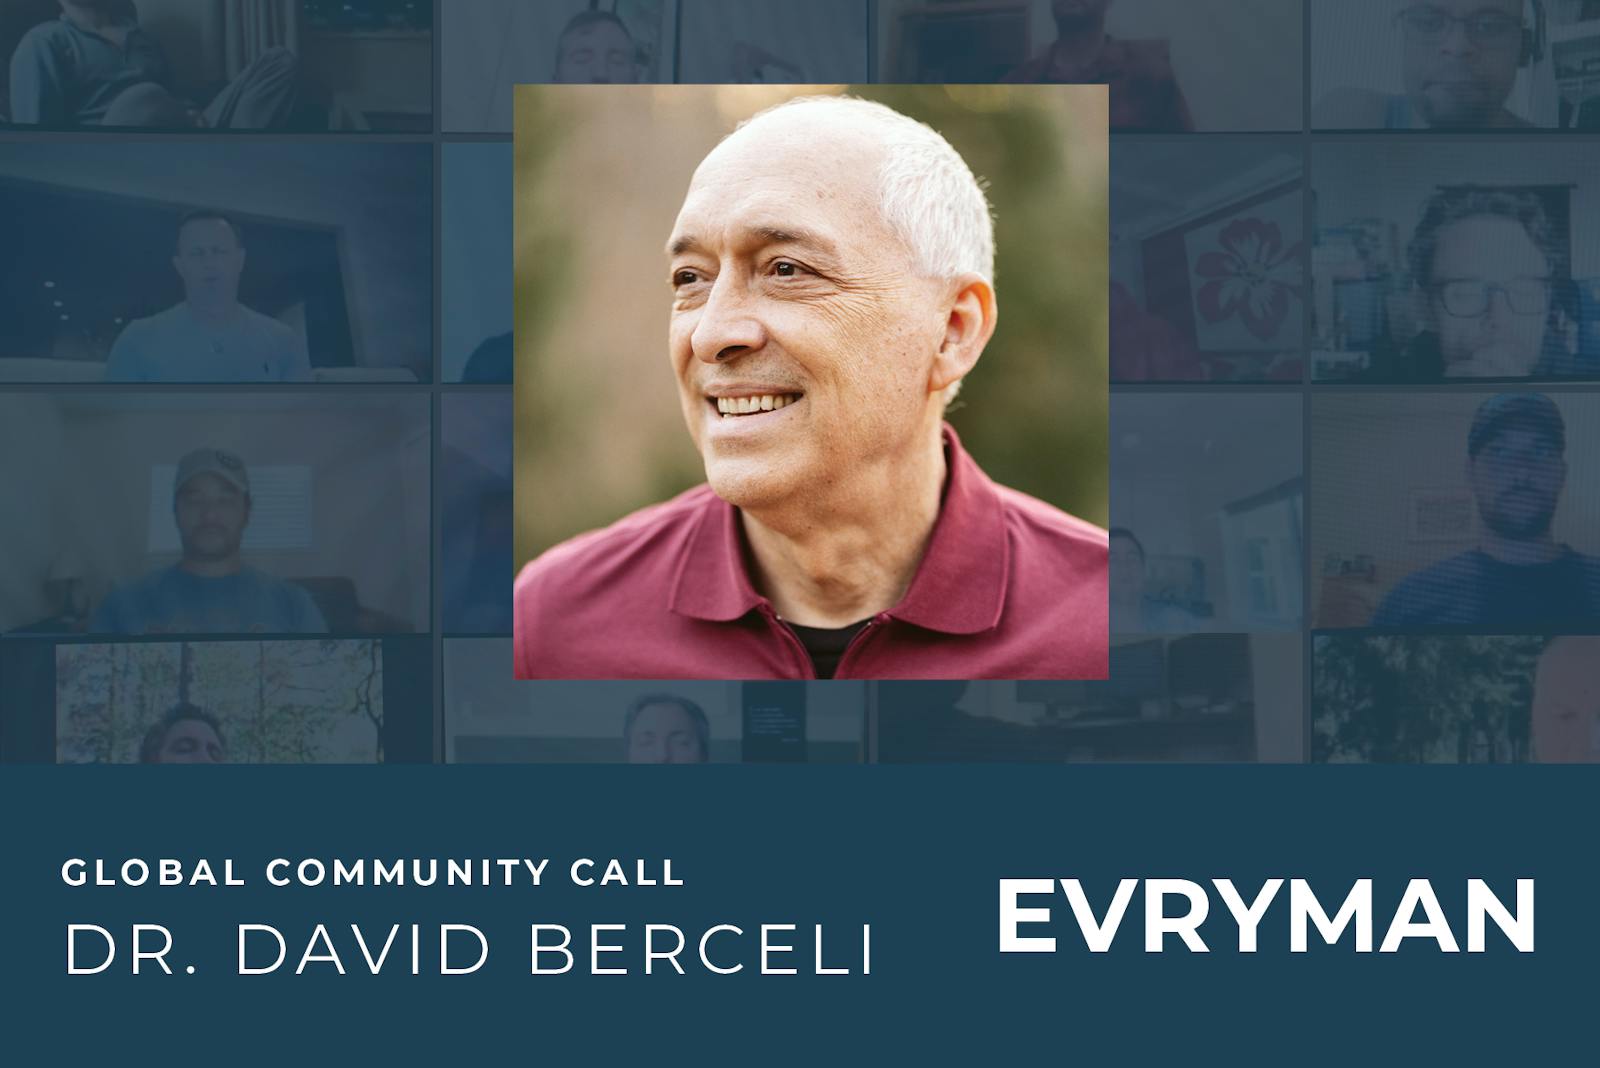 EVRYMAN Global Community Call with special guest David Berceli